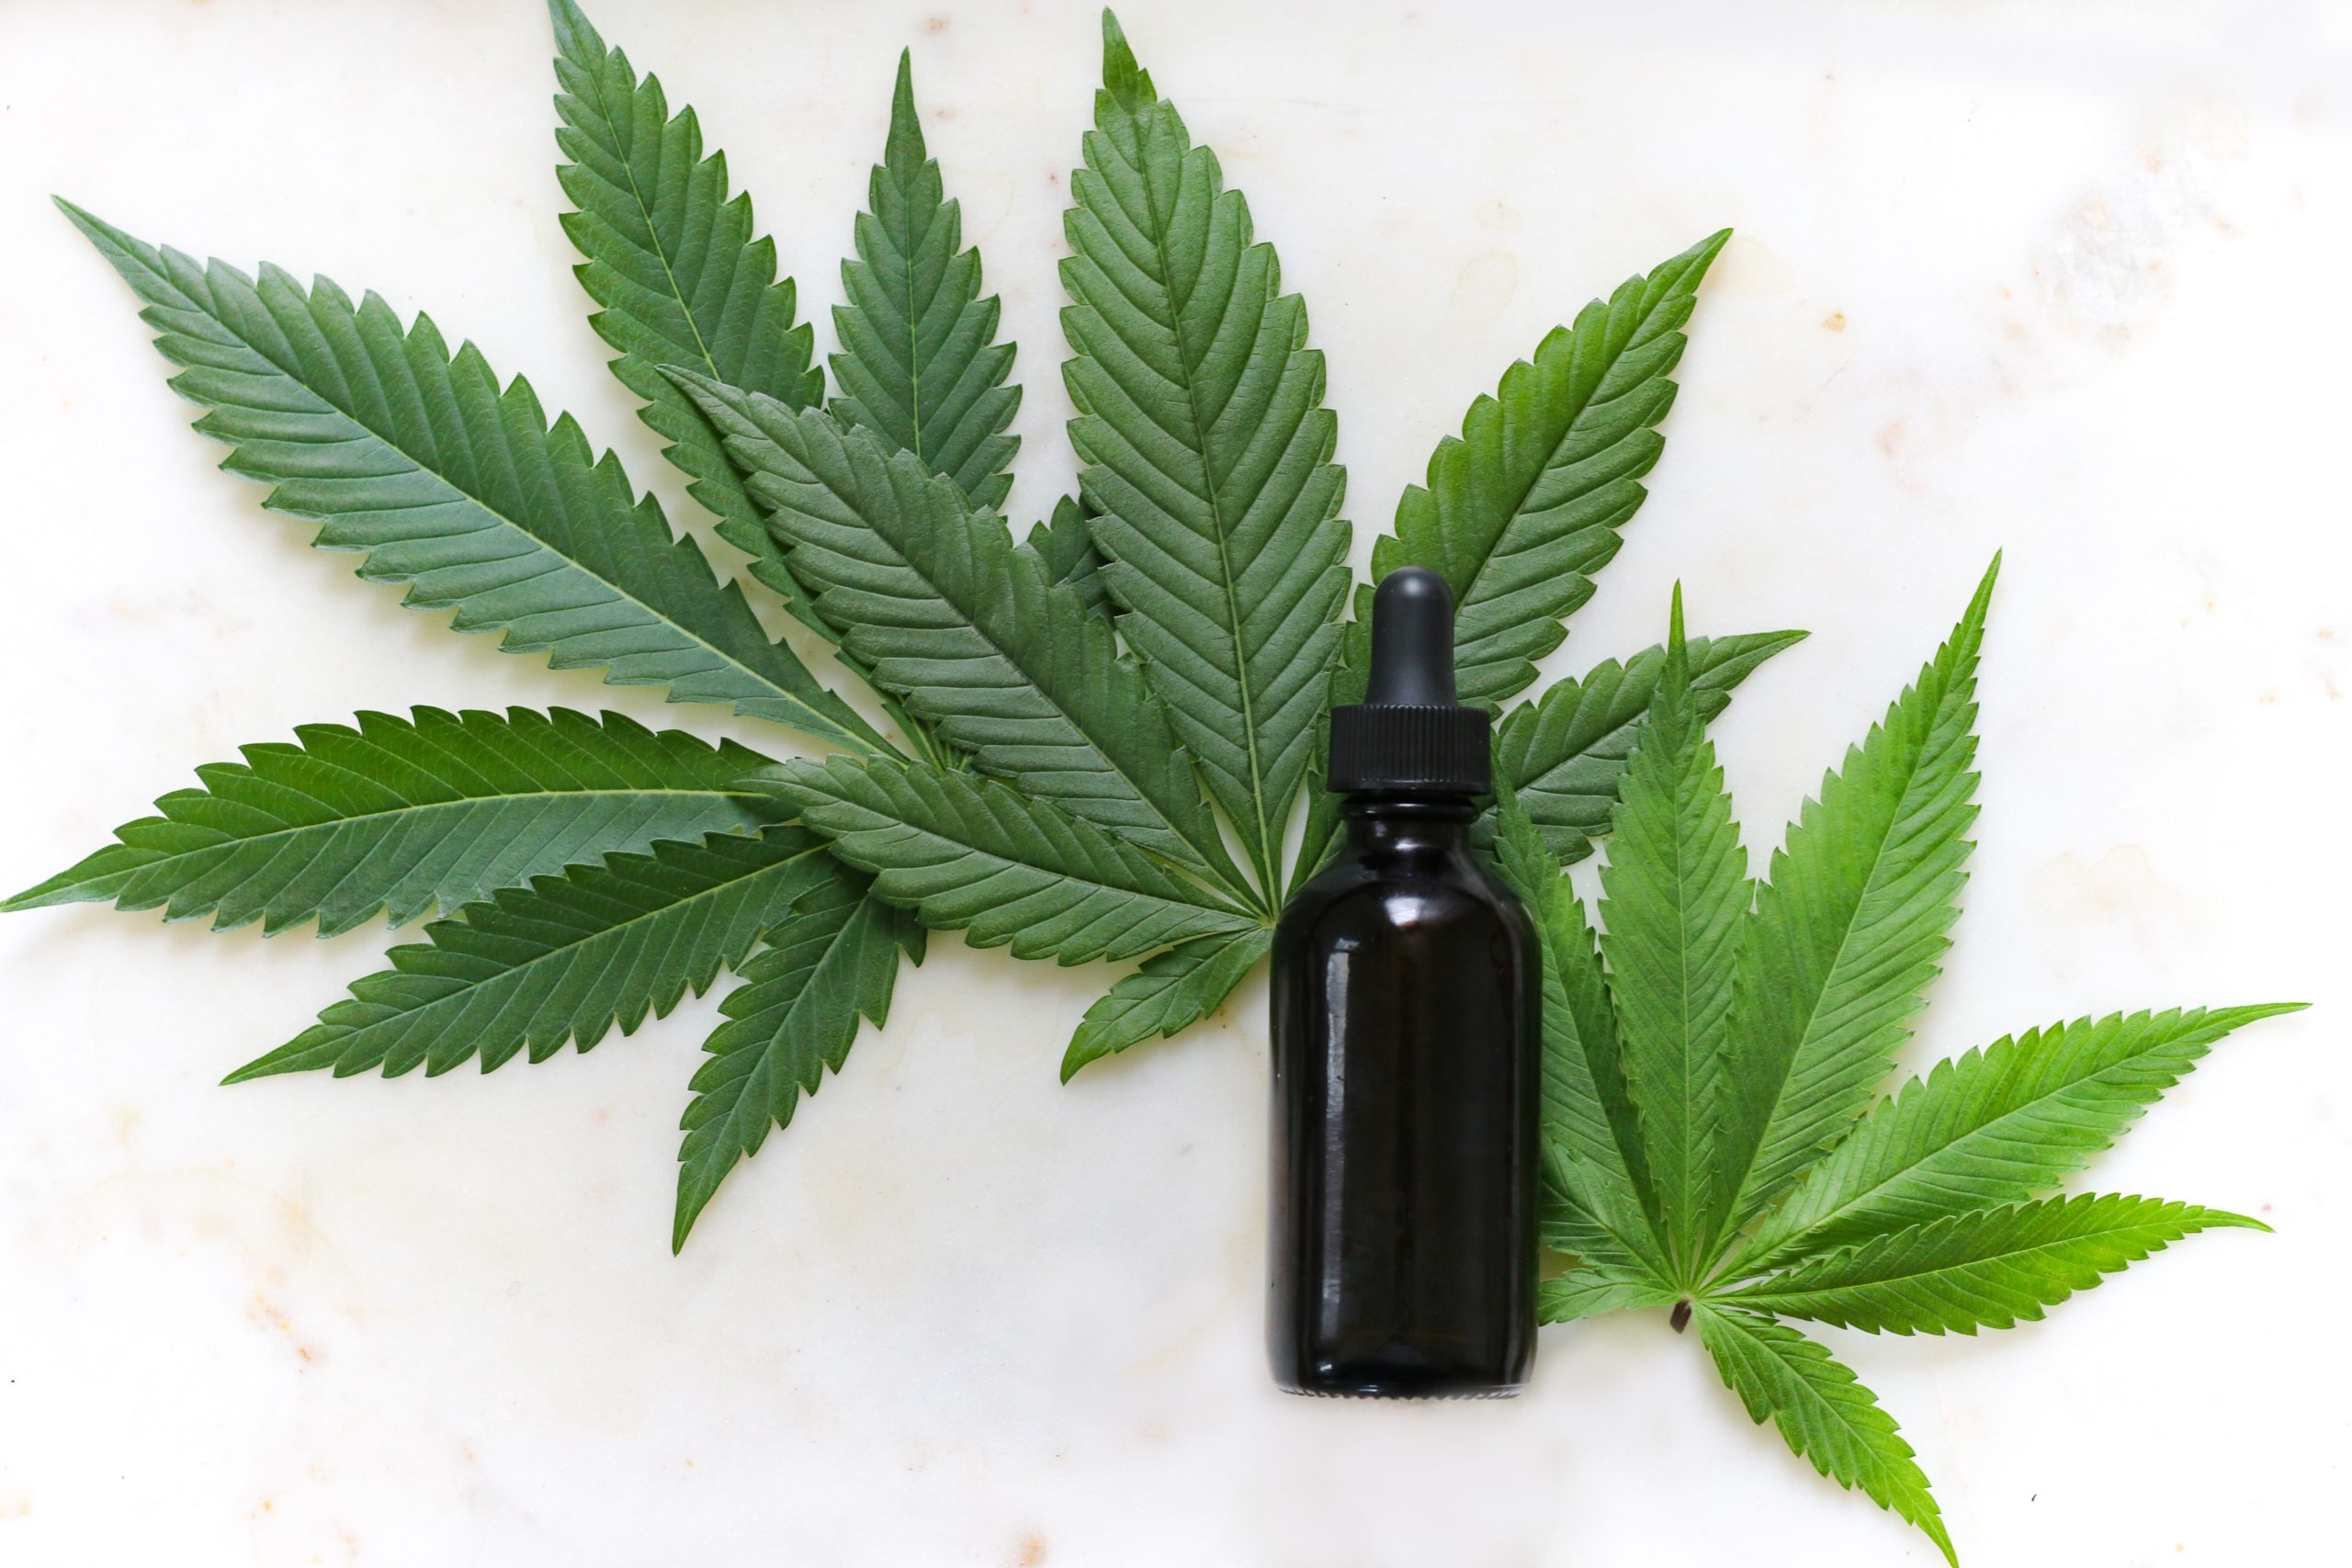 Why Don’t Major Supplement Companies Make Cbd Oil?